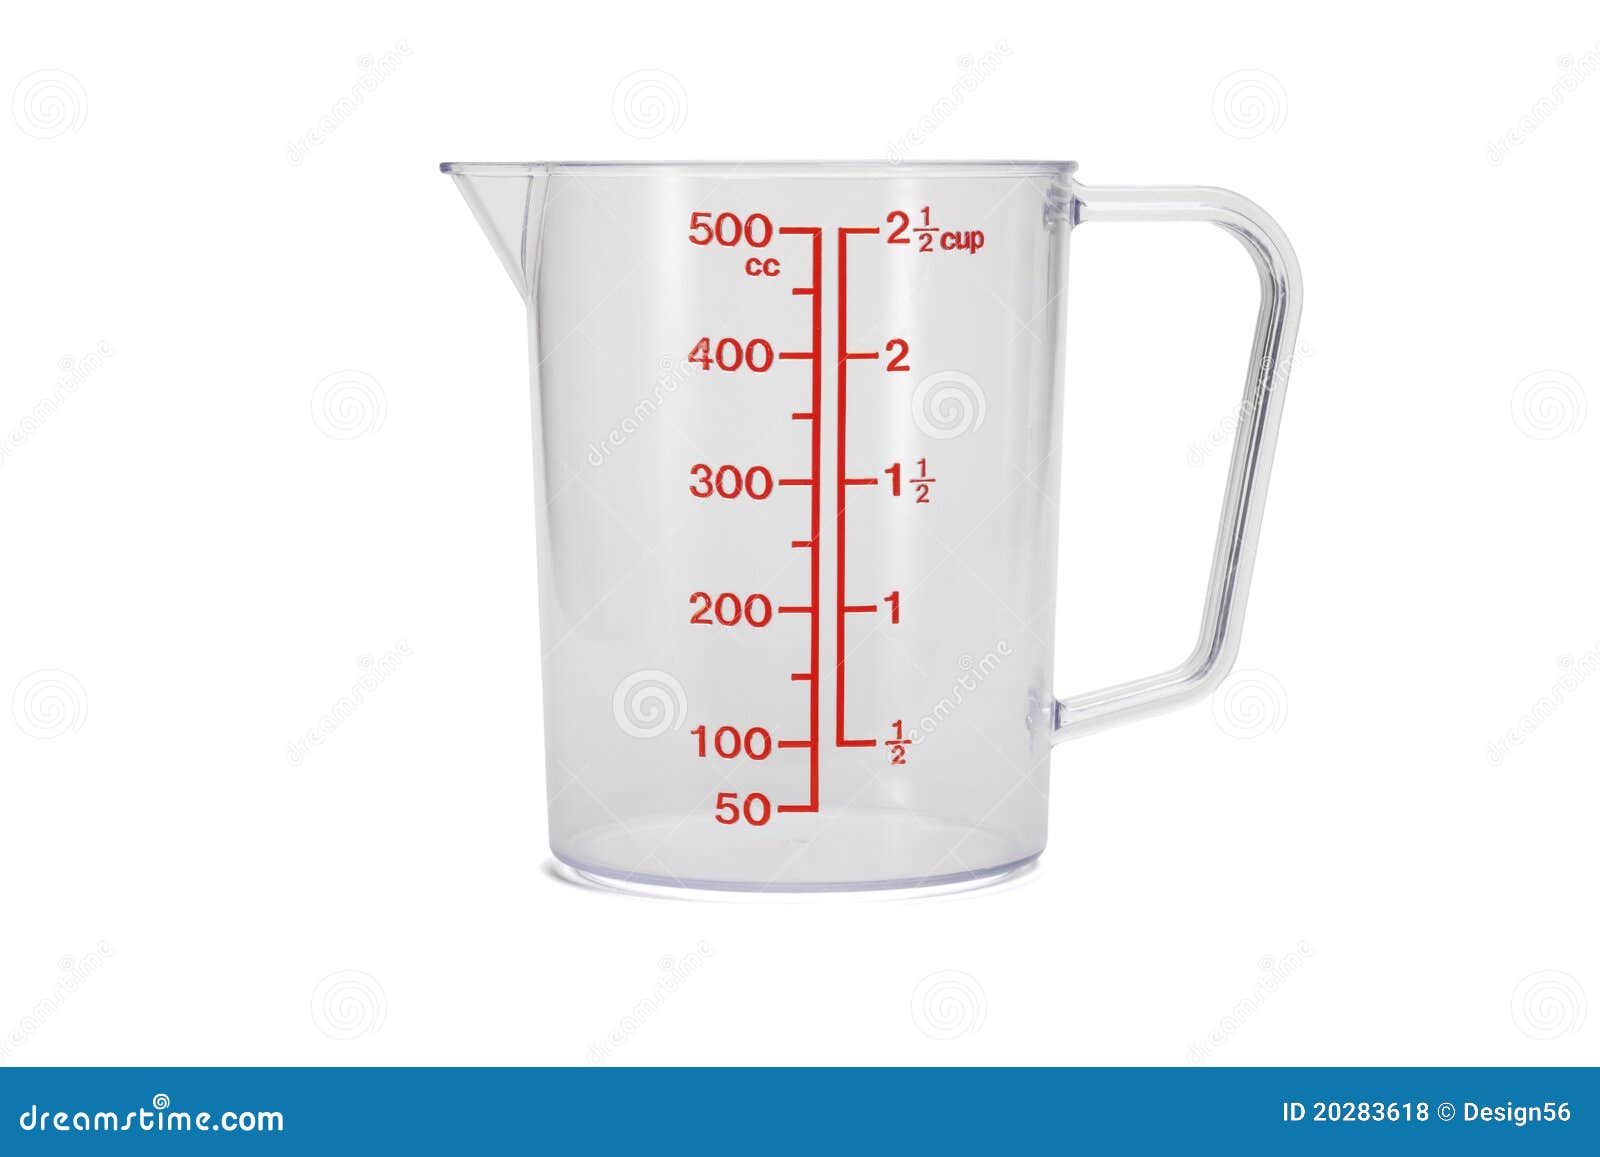 plastic kitchen measuring cup